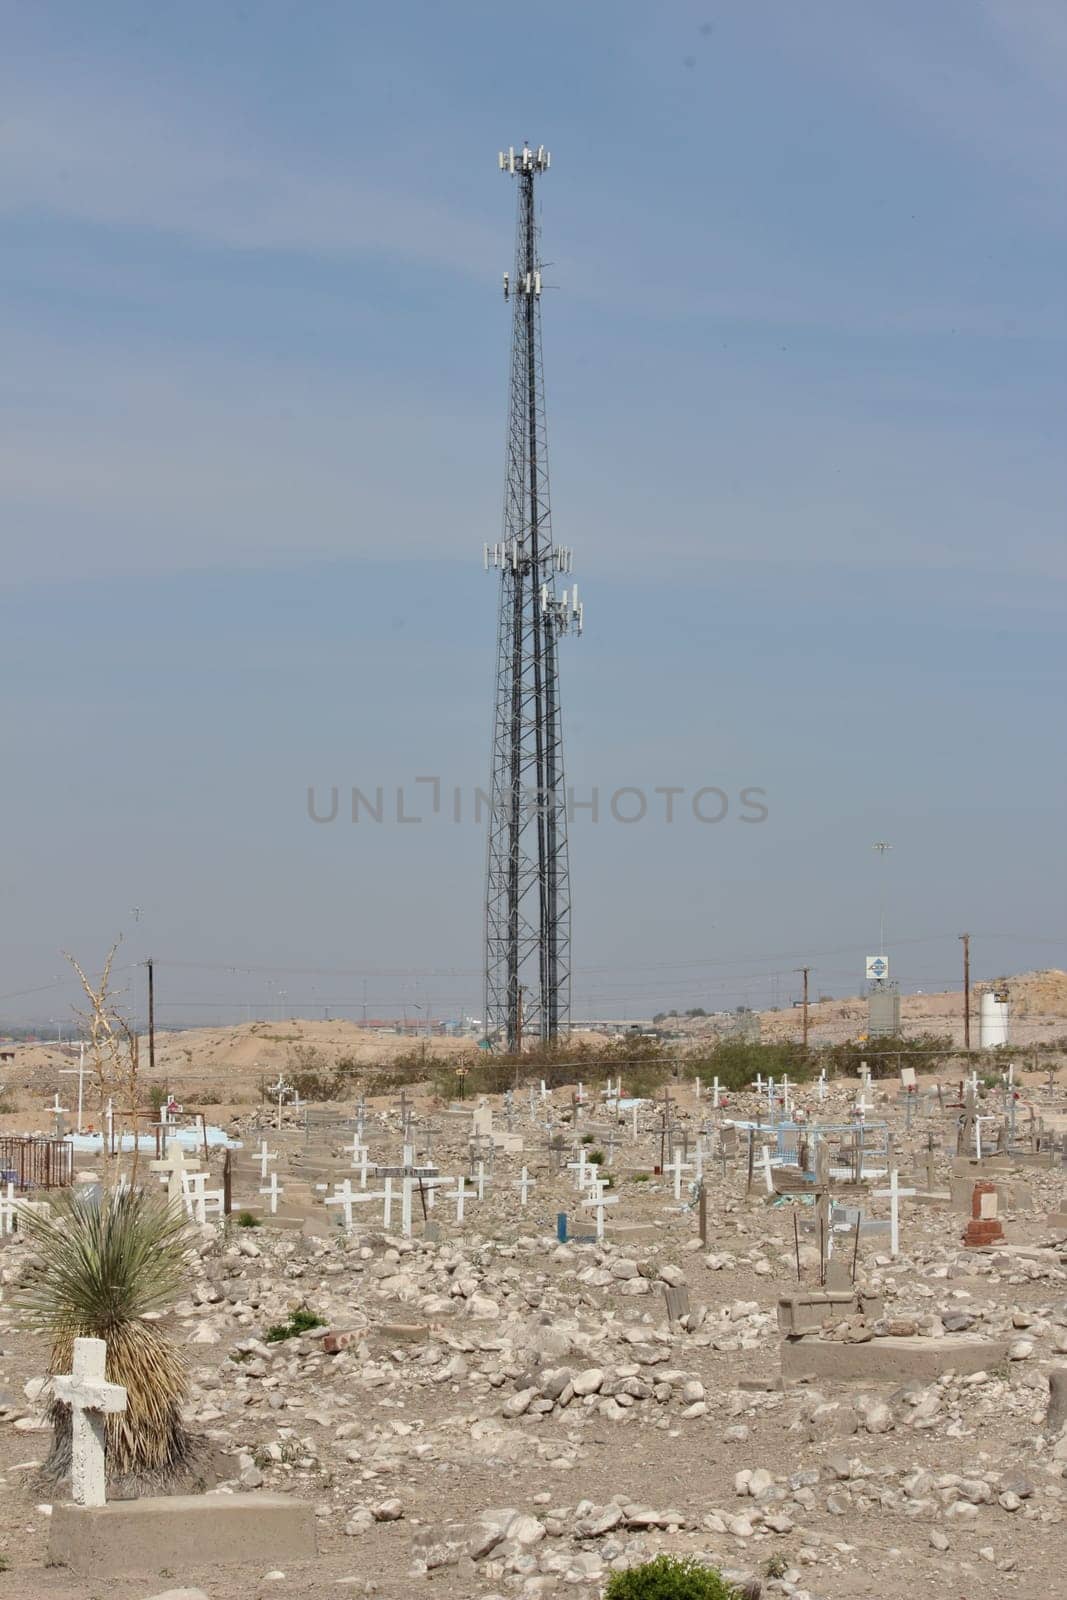 Transmission tower in the cemetery of a village by Marcielito